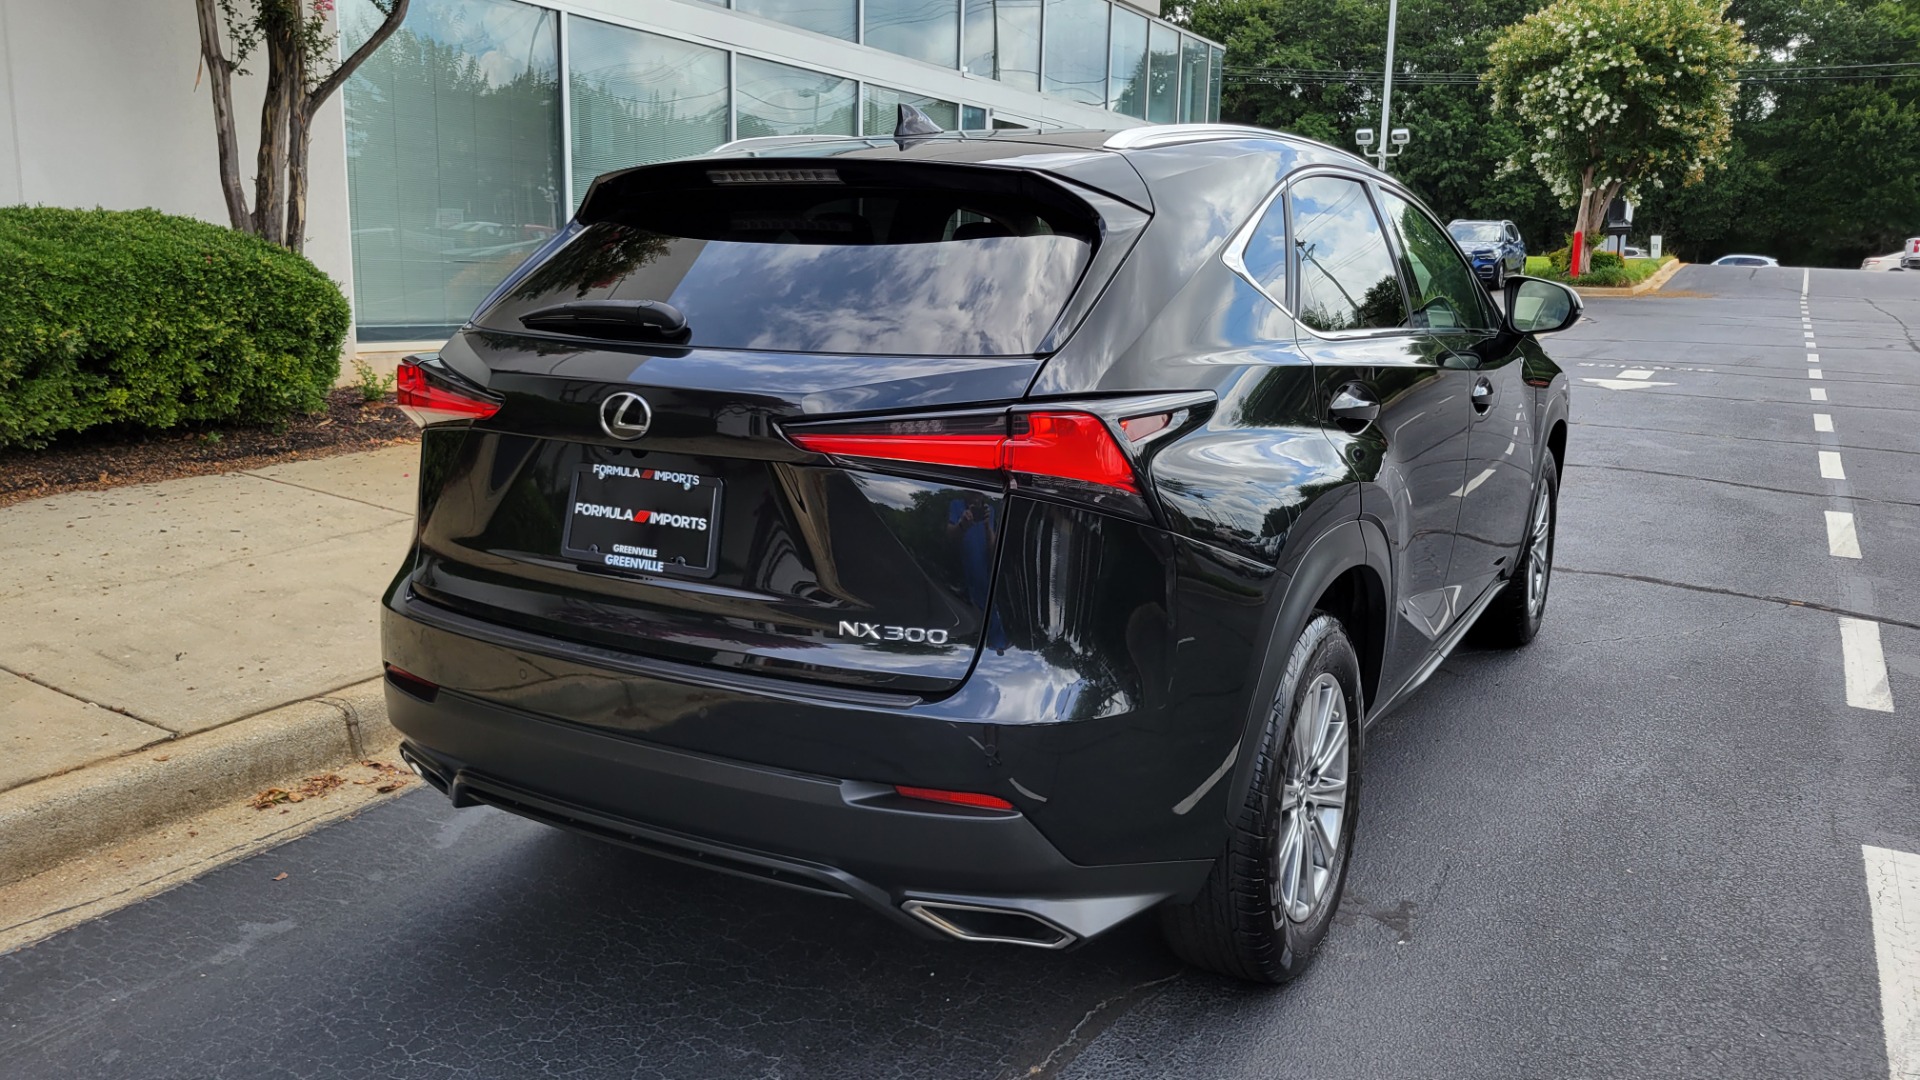 Used 2019 Lexus NX 300 / 2.0L TURBO / AUTO / SUNROOF / VENTILATED SEATS / CAMERA for sale Sold at Formula Imports in Charlotte NC 28227 5